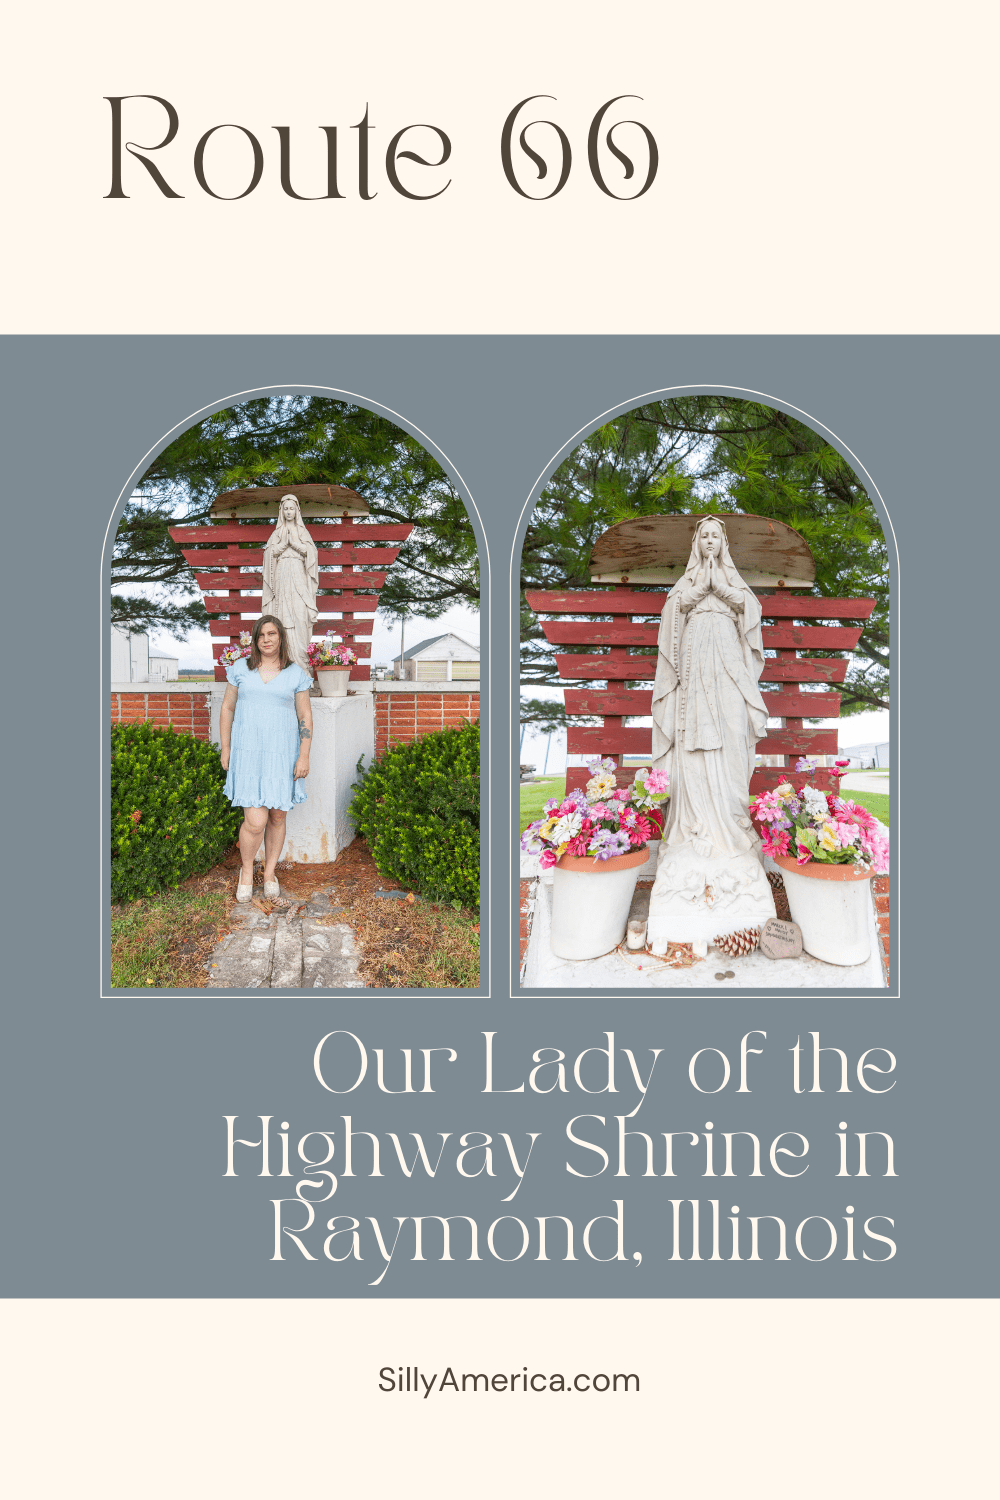 The Our Lady of the Highway shrine in Raymond, Illinois is a Carrara marble statue of the Virgin Mary (Our Lady of Lourdes) that guides and protects weary travelers on Route 66.  #RoadTrips #RoadTripStop #Route66 #Route66RoadTrip #IllinoisRoute66 #Illinois #IllinoisRoadTrip #IllinoisRoadsideAttractions #RoadsideAttractions #RoadsideAttraction #RoadsideAmerica #RoadTrip